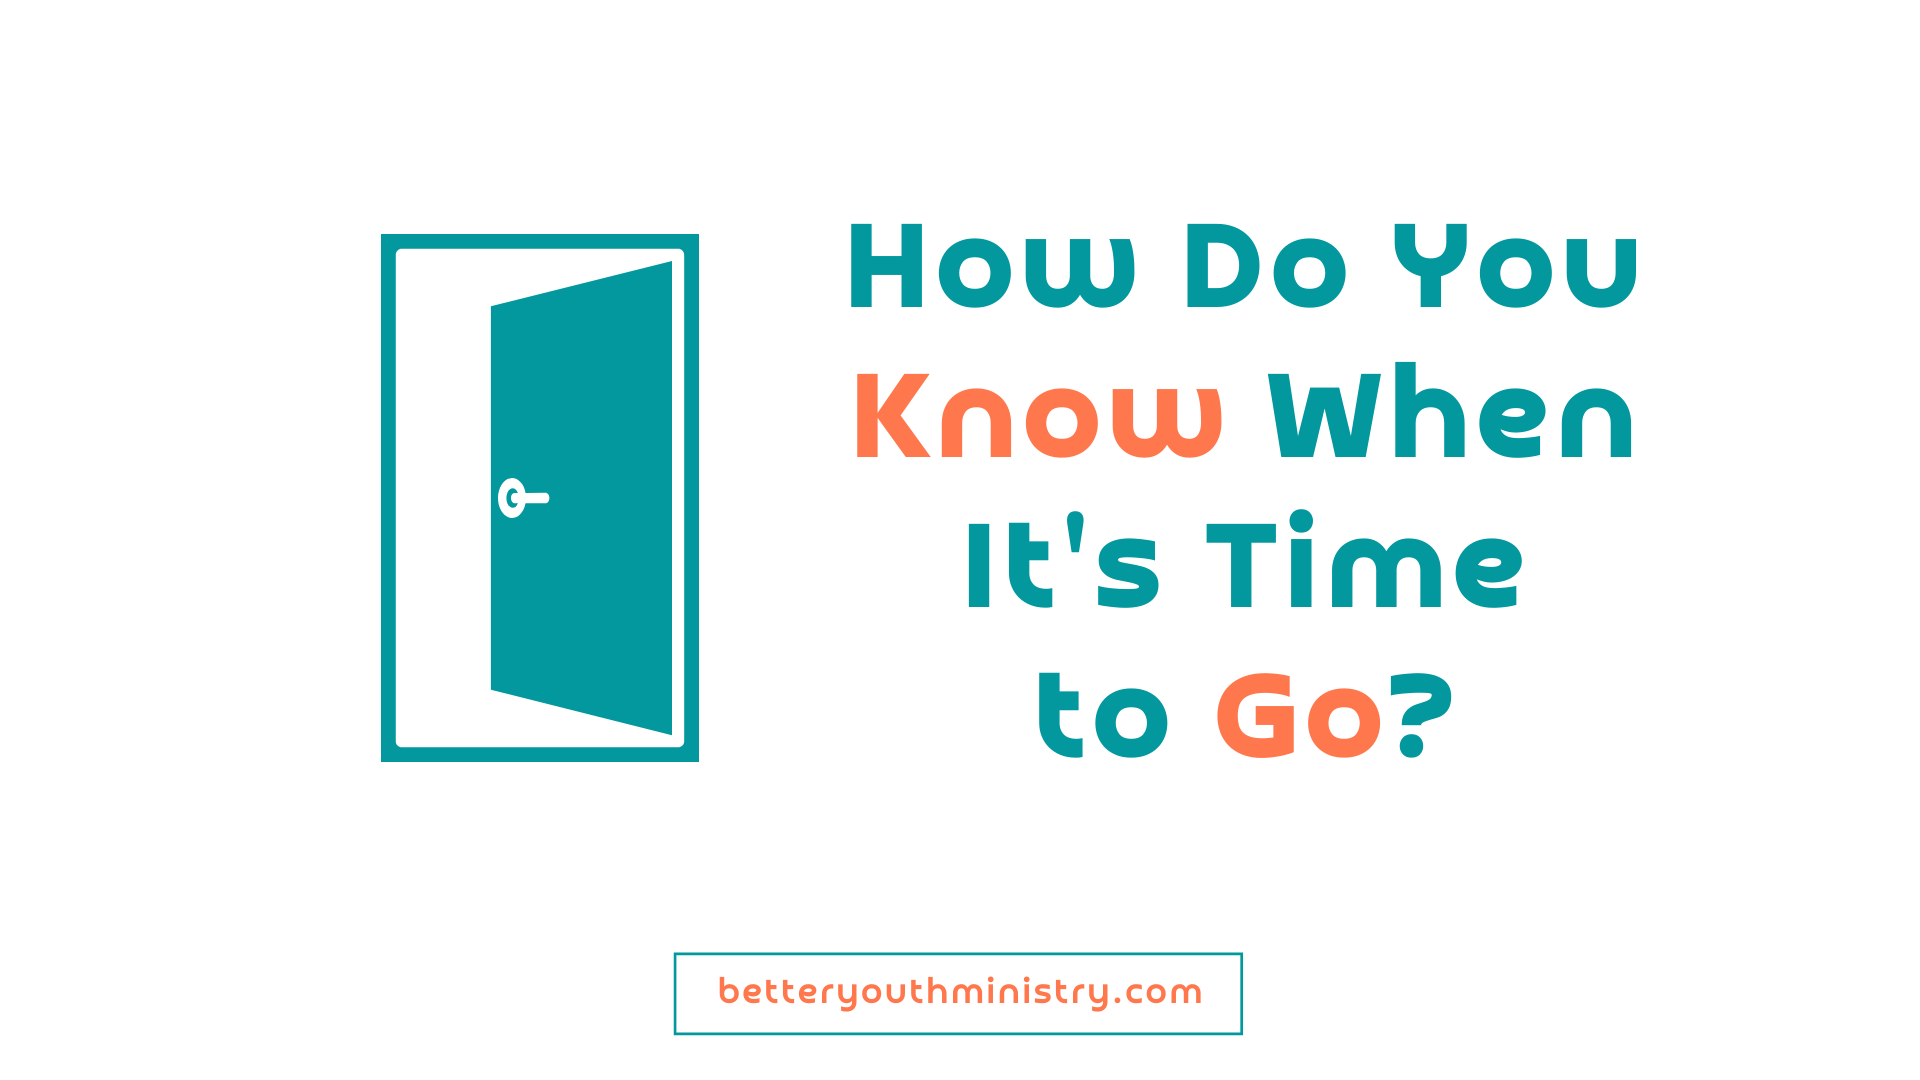 How does a youth pastor know when it's time to go?